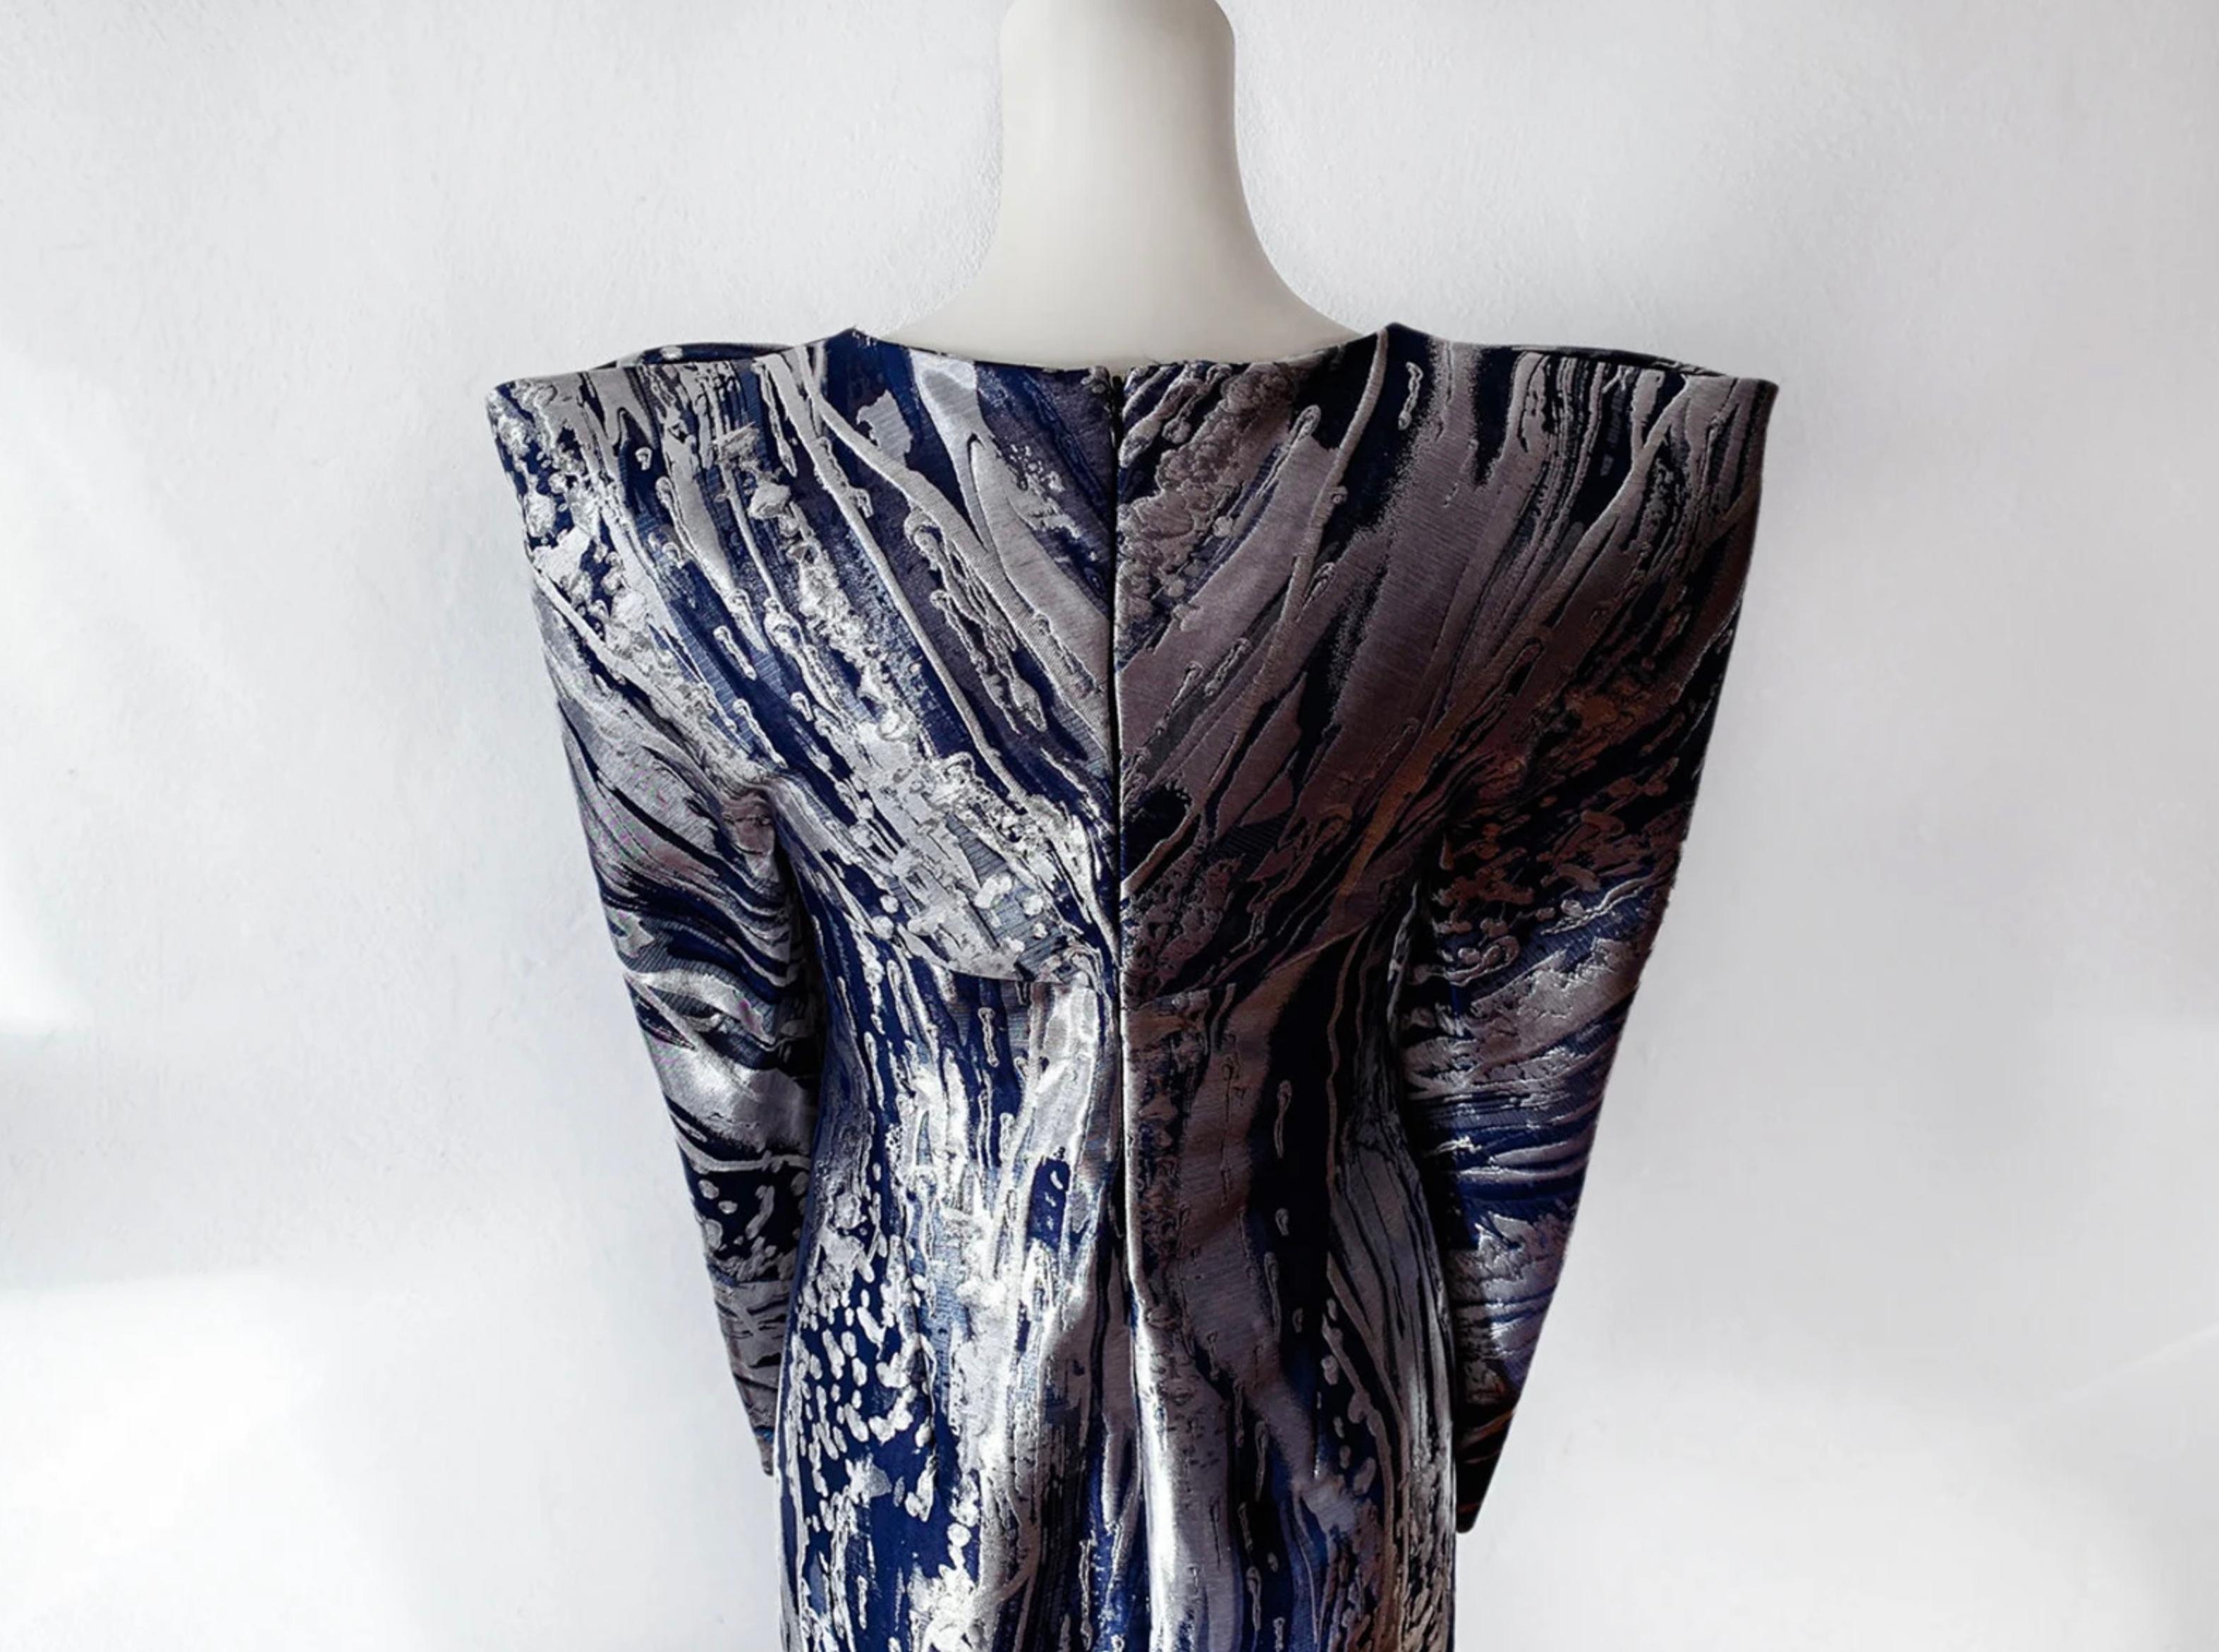 
Breathtaking Showstopper! Rare Collectors' Piece by the one and only Alexander McQueen.
Futuristic Avant Garde surreal dream and part of Fashion History.
Blue and silver metallic paint stroke brocade shift dress. The construction of this garment is